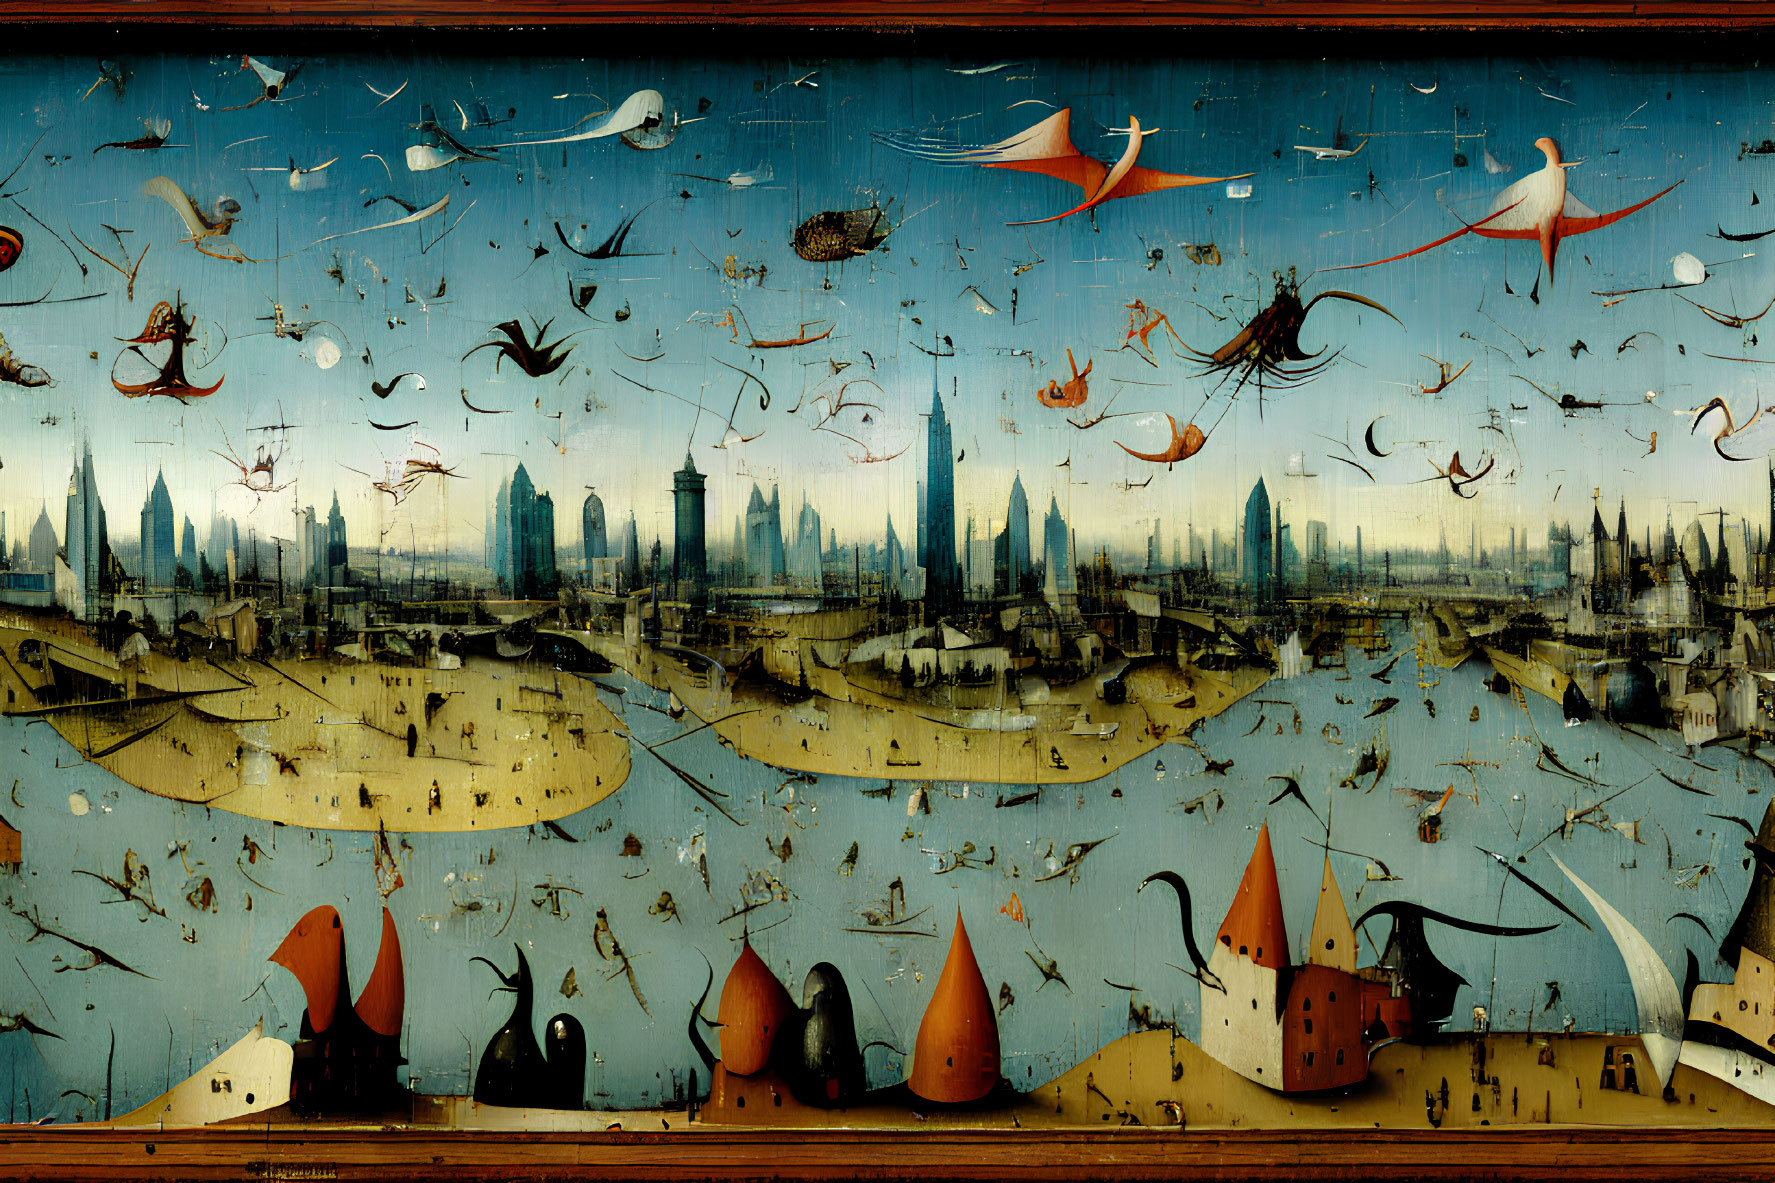 Surreal cityscape painting with flying fish and marine creatures in dreamlike underwater scene